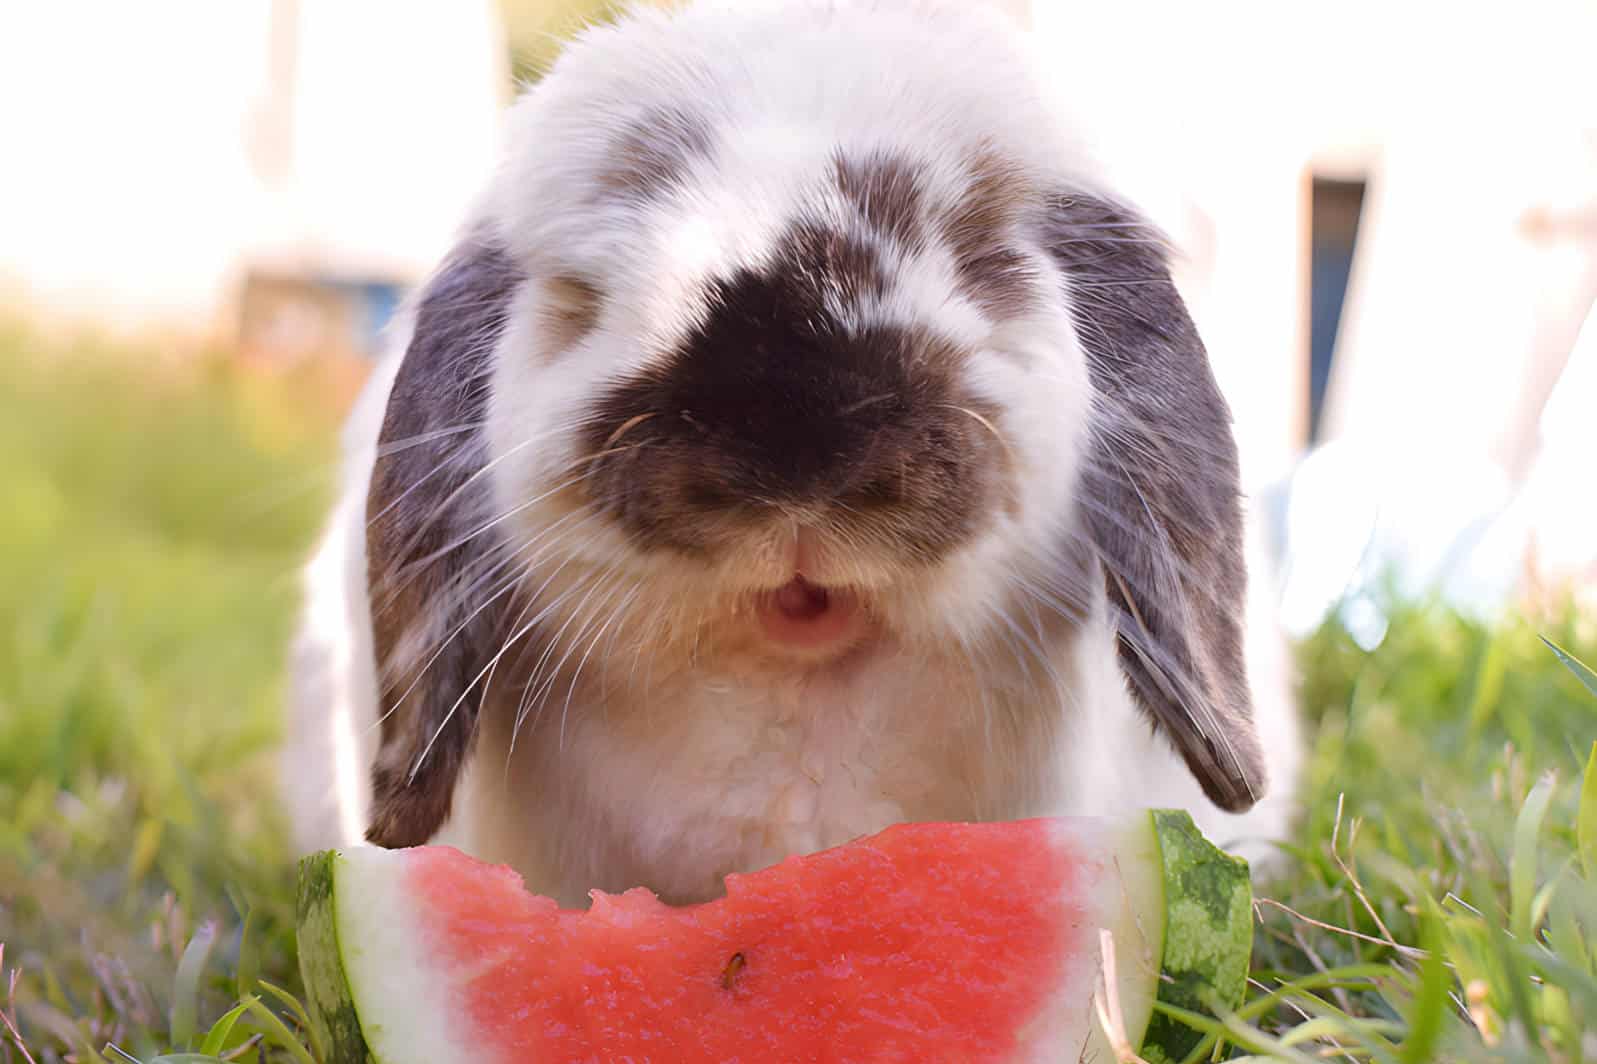 Benefits and Cons of Watermelon on Rabbits